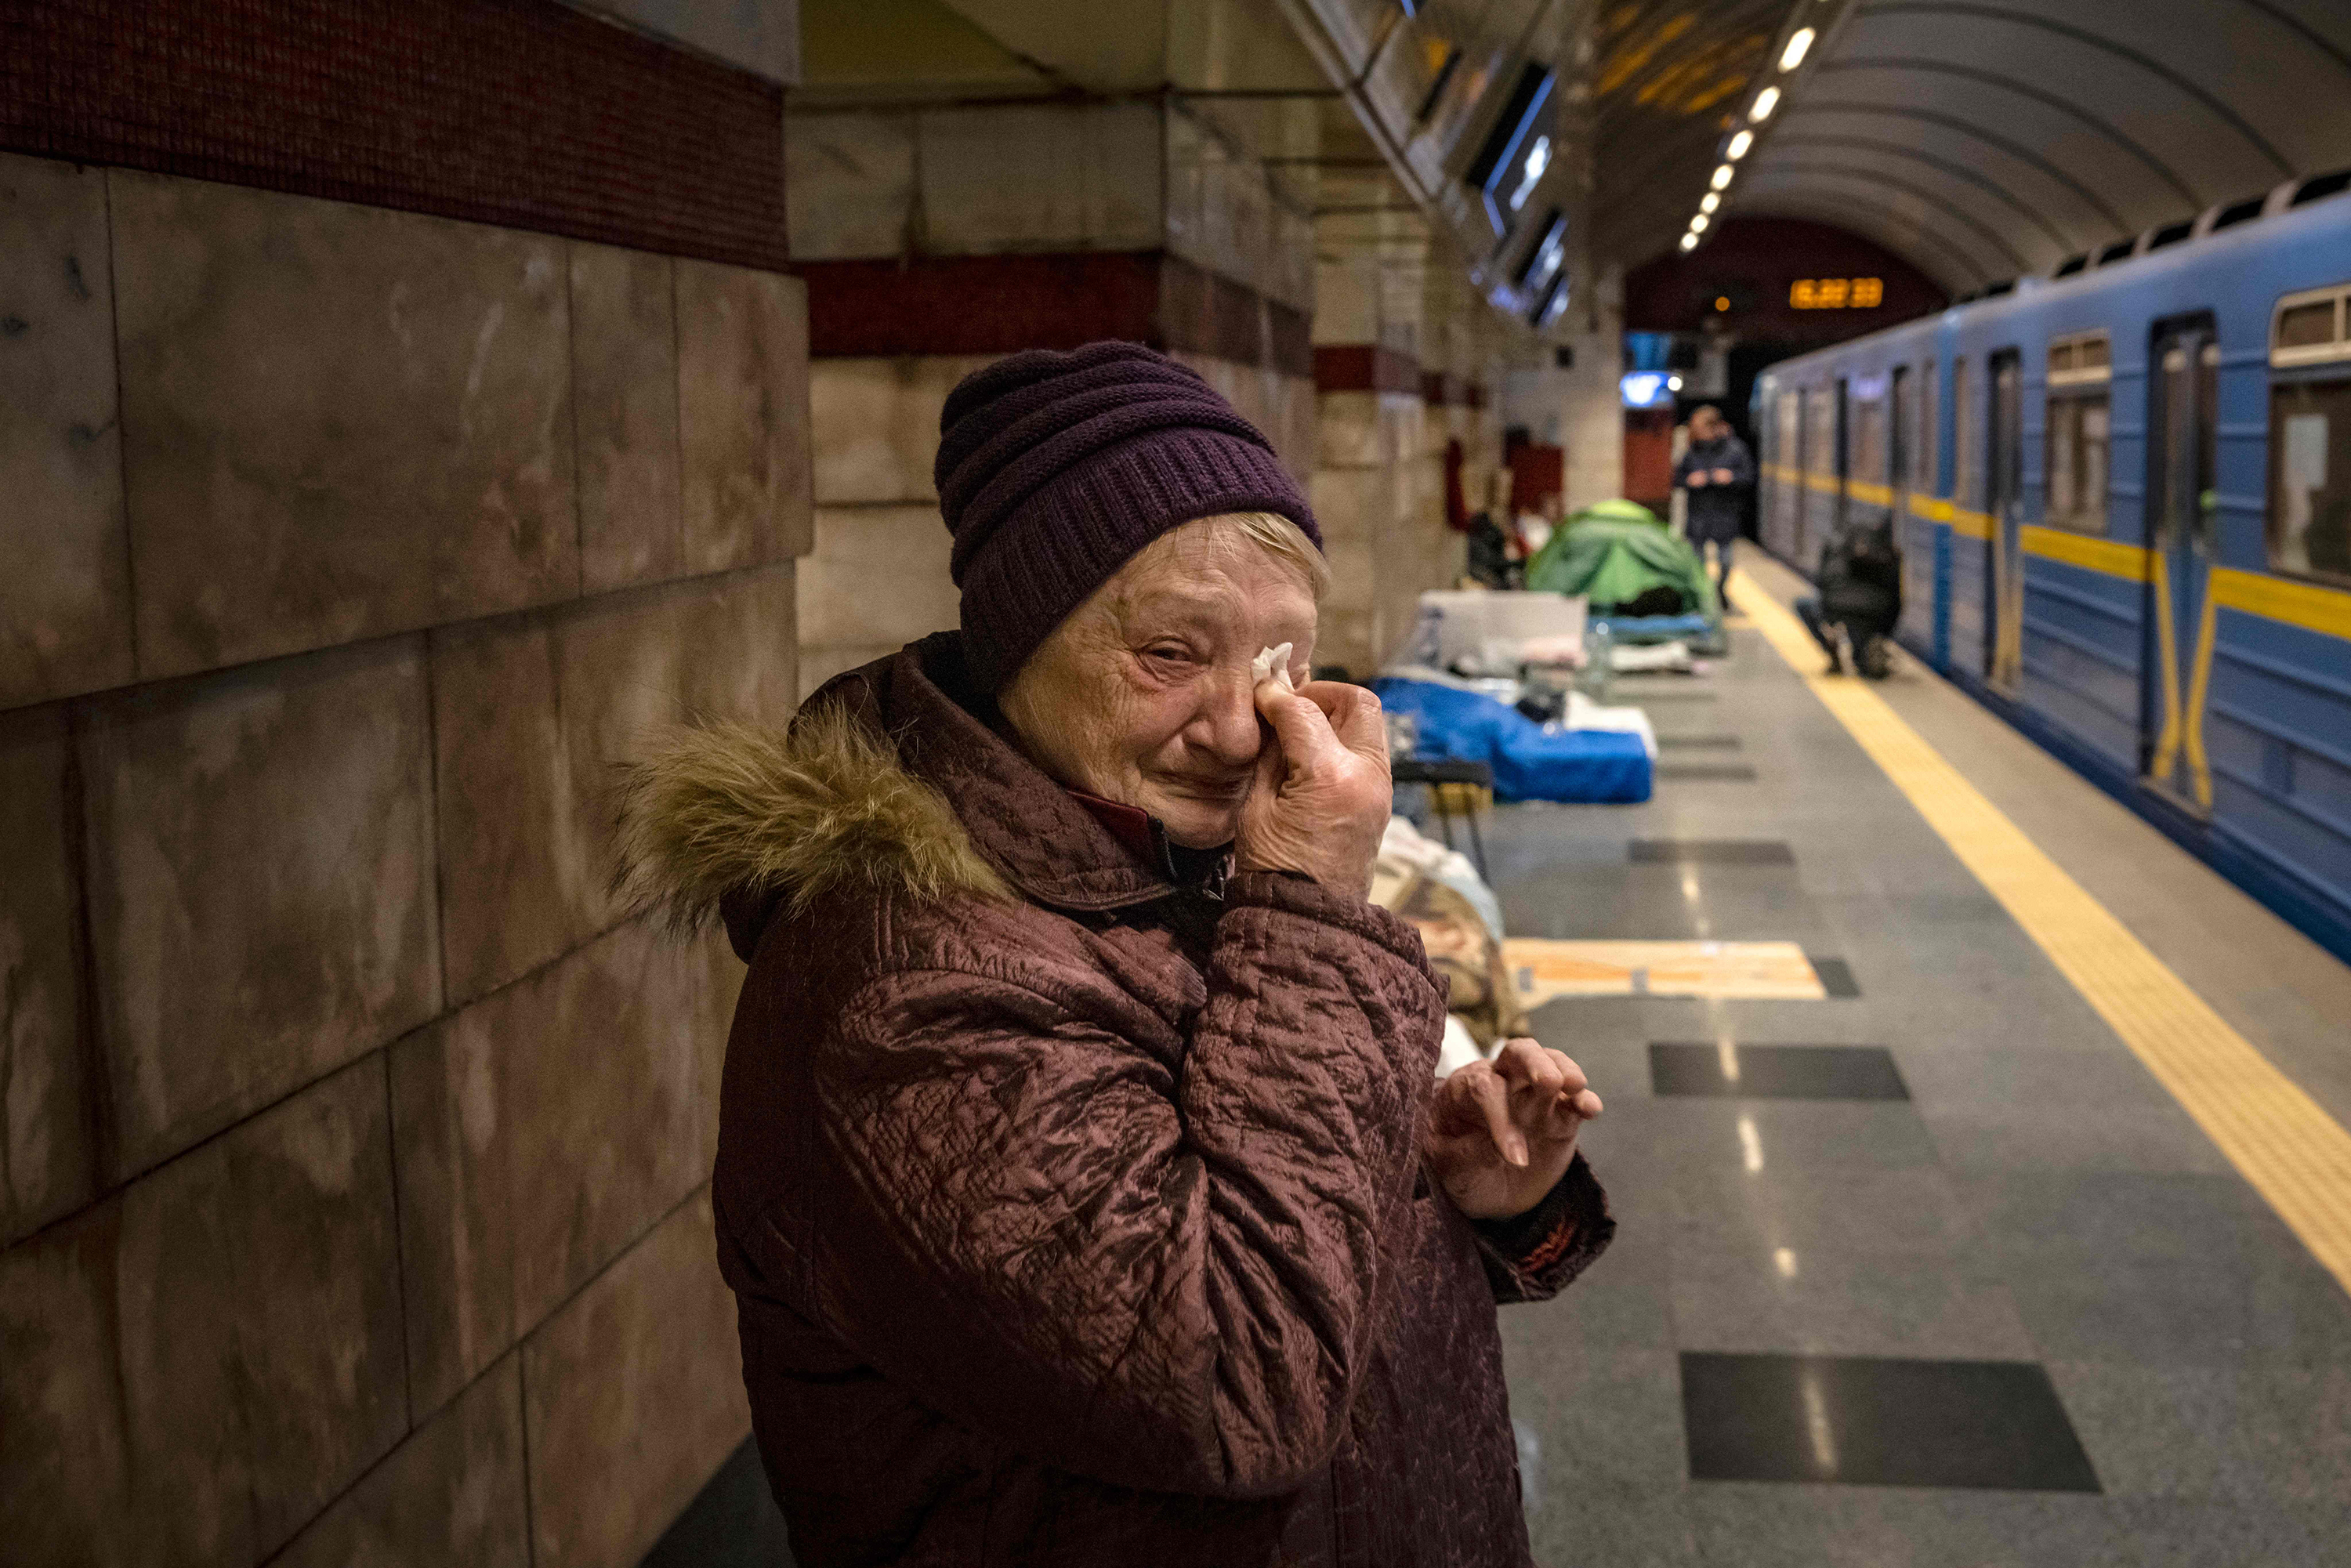 A woman cries as she takes refuge in a metro station being used as bomb shelter in Kyiv, Ukraine on March 18.